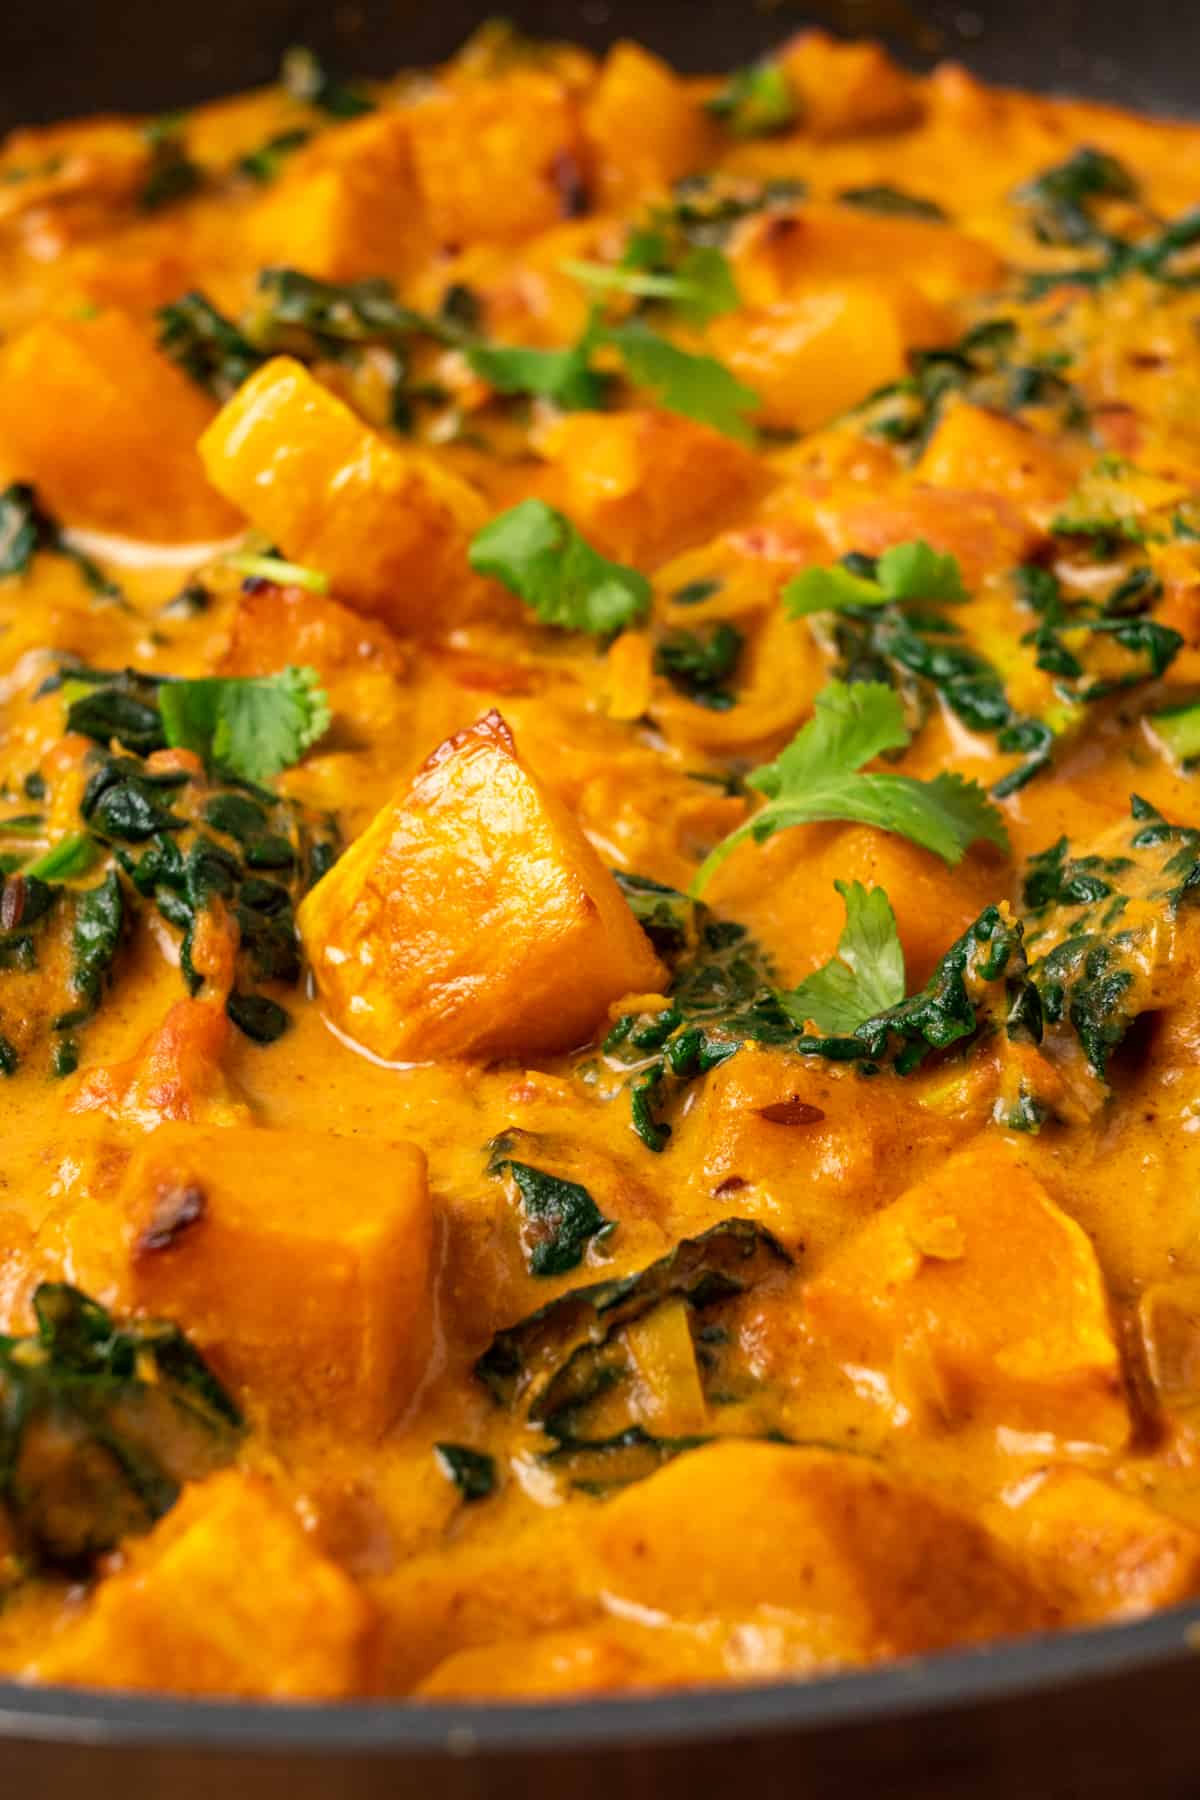 Cubes of roasted butternut squash and dark green kale in a thick orange coloured curry sauce.